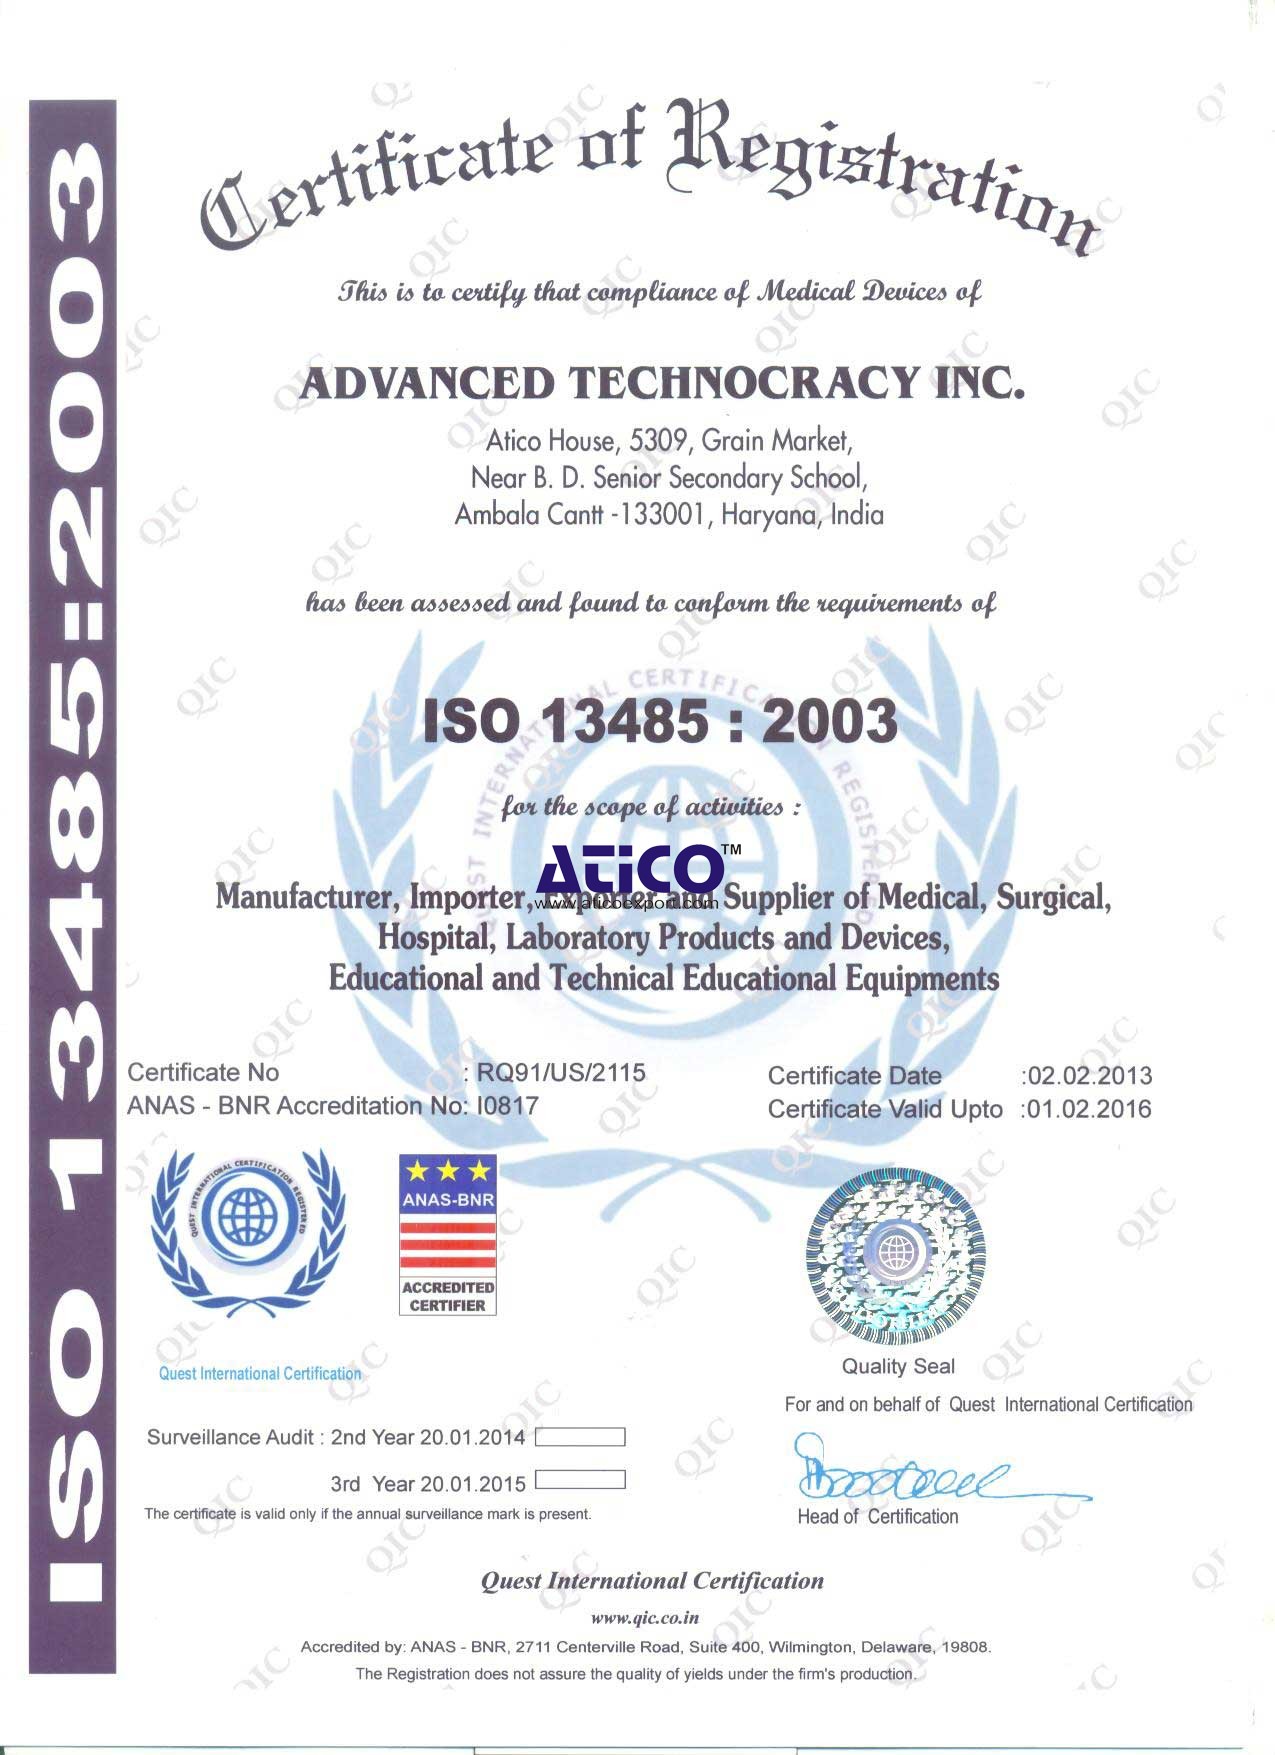 ISO 13485:2003 Certificate